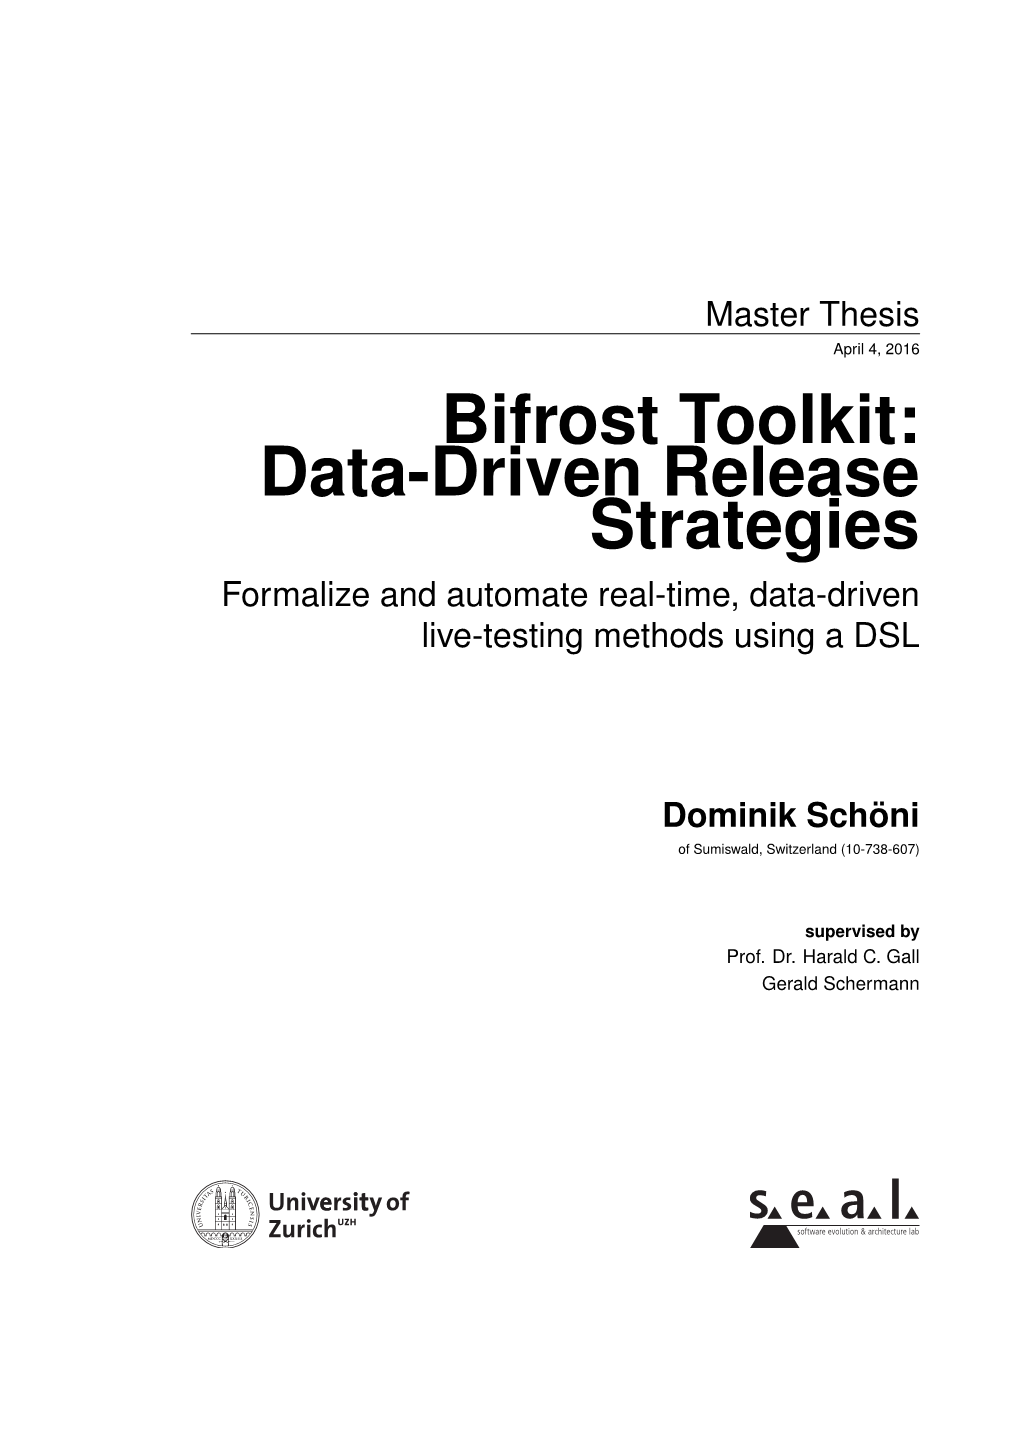 Bifrost Toolkit: Data-Driven Release Strategies Formalize and Automate Real-Time, Data-Driven Live-Testing Methods Using a DSL